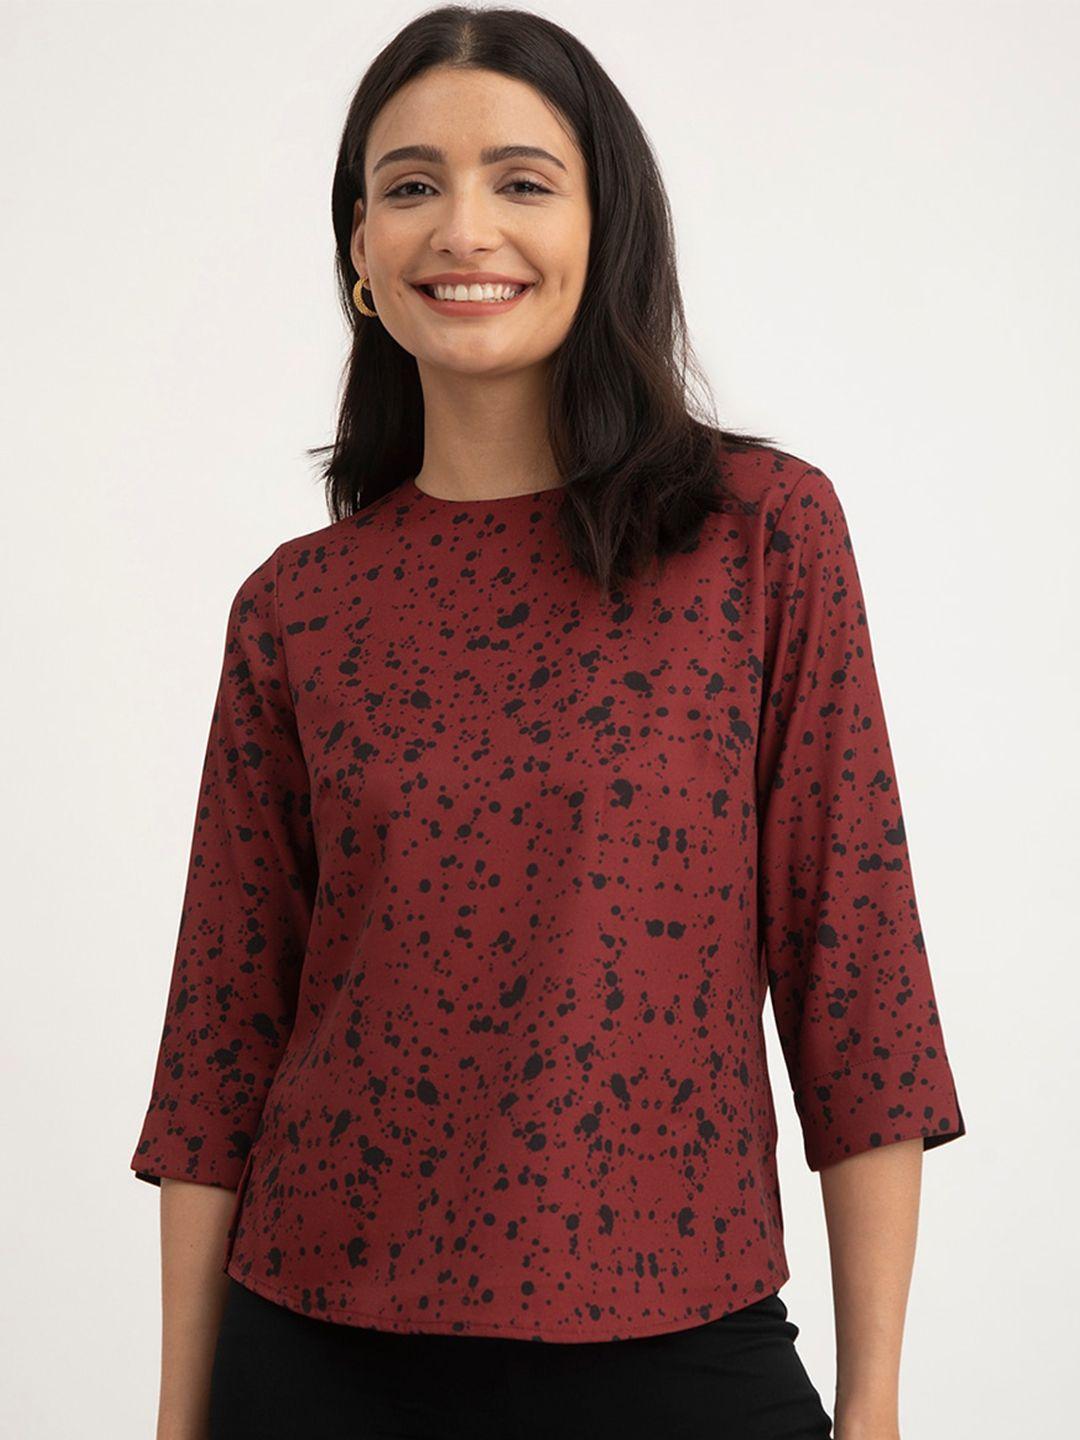 fablestreet-abstract-printed-crew-neck-three-quarter-sleeves-top